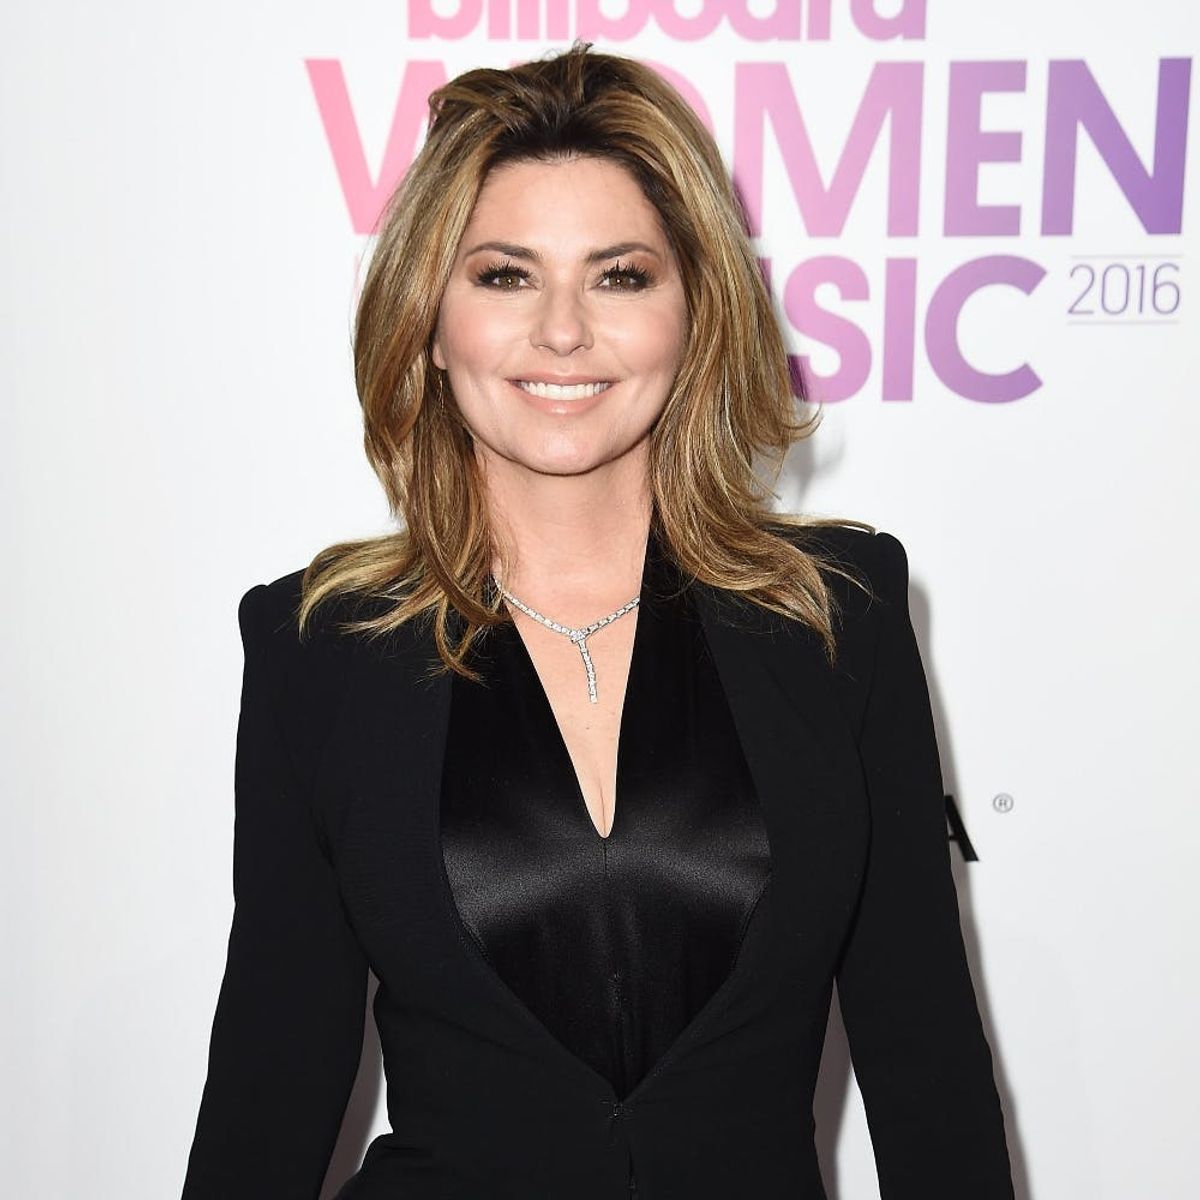 Shania Twain Reveals She Has a New Album Coming in September!